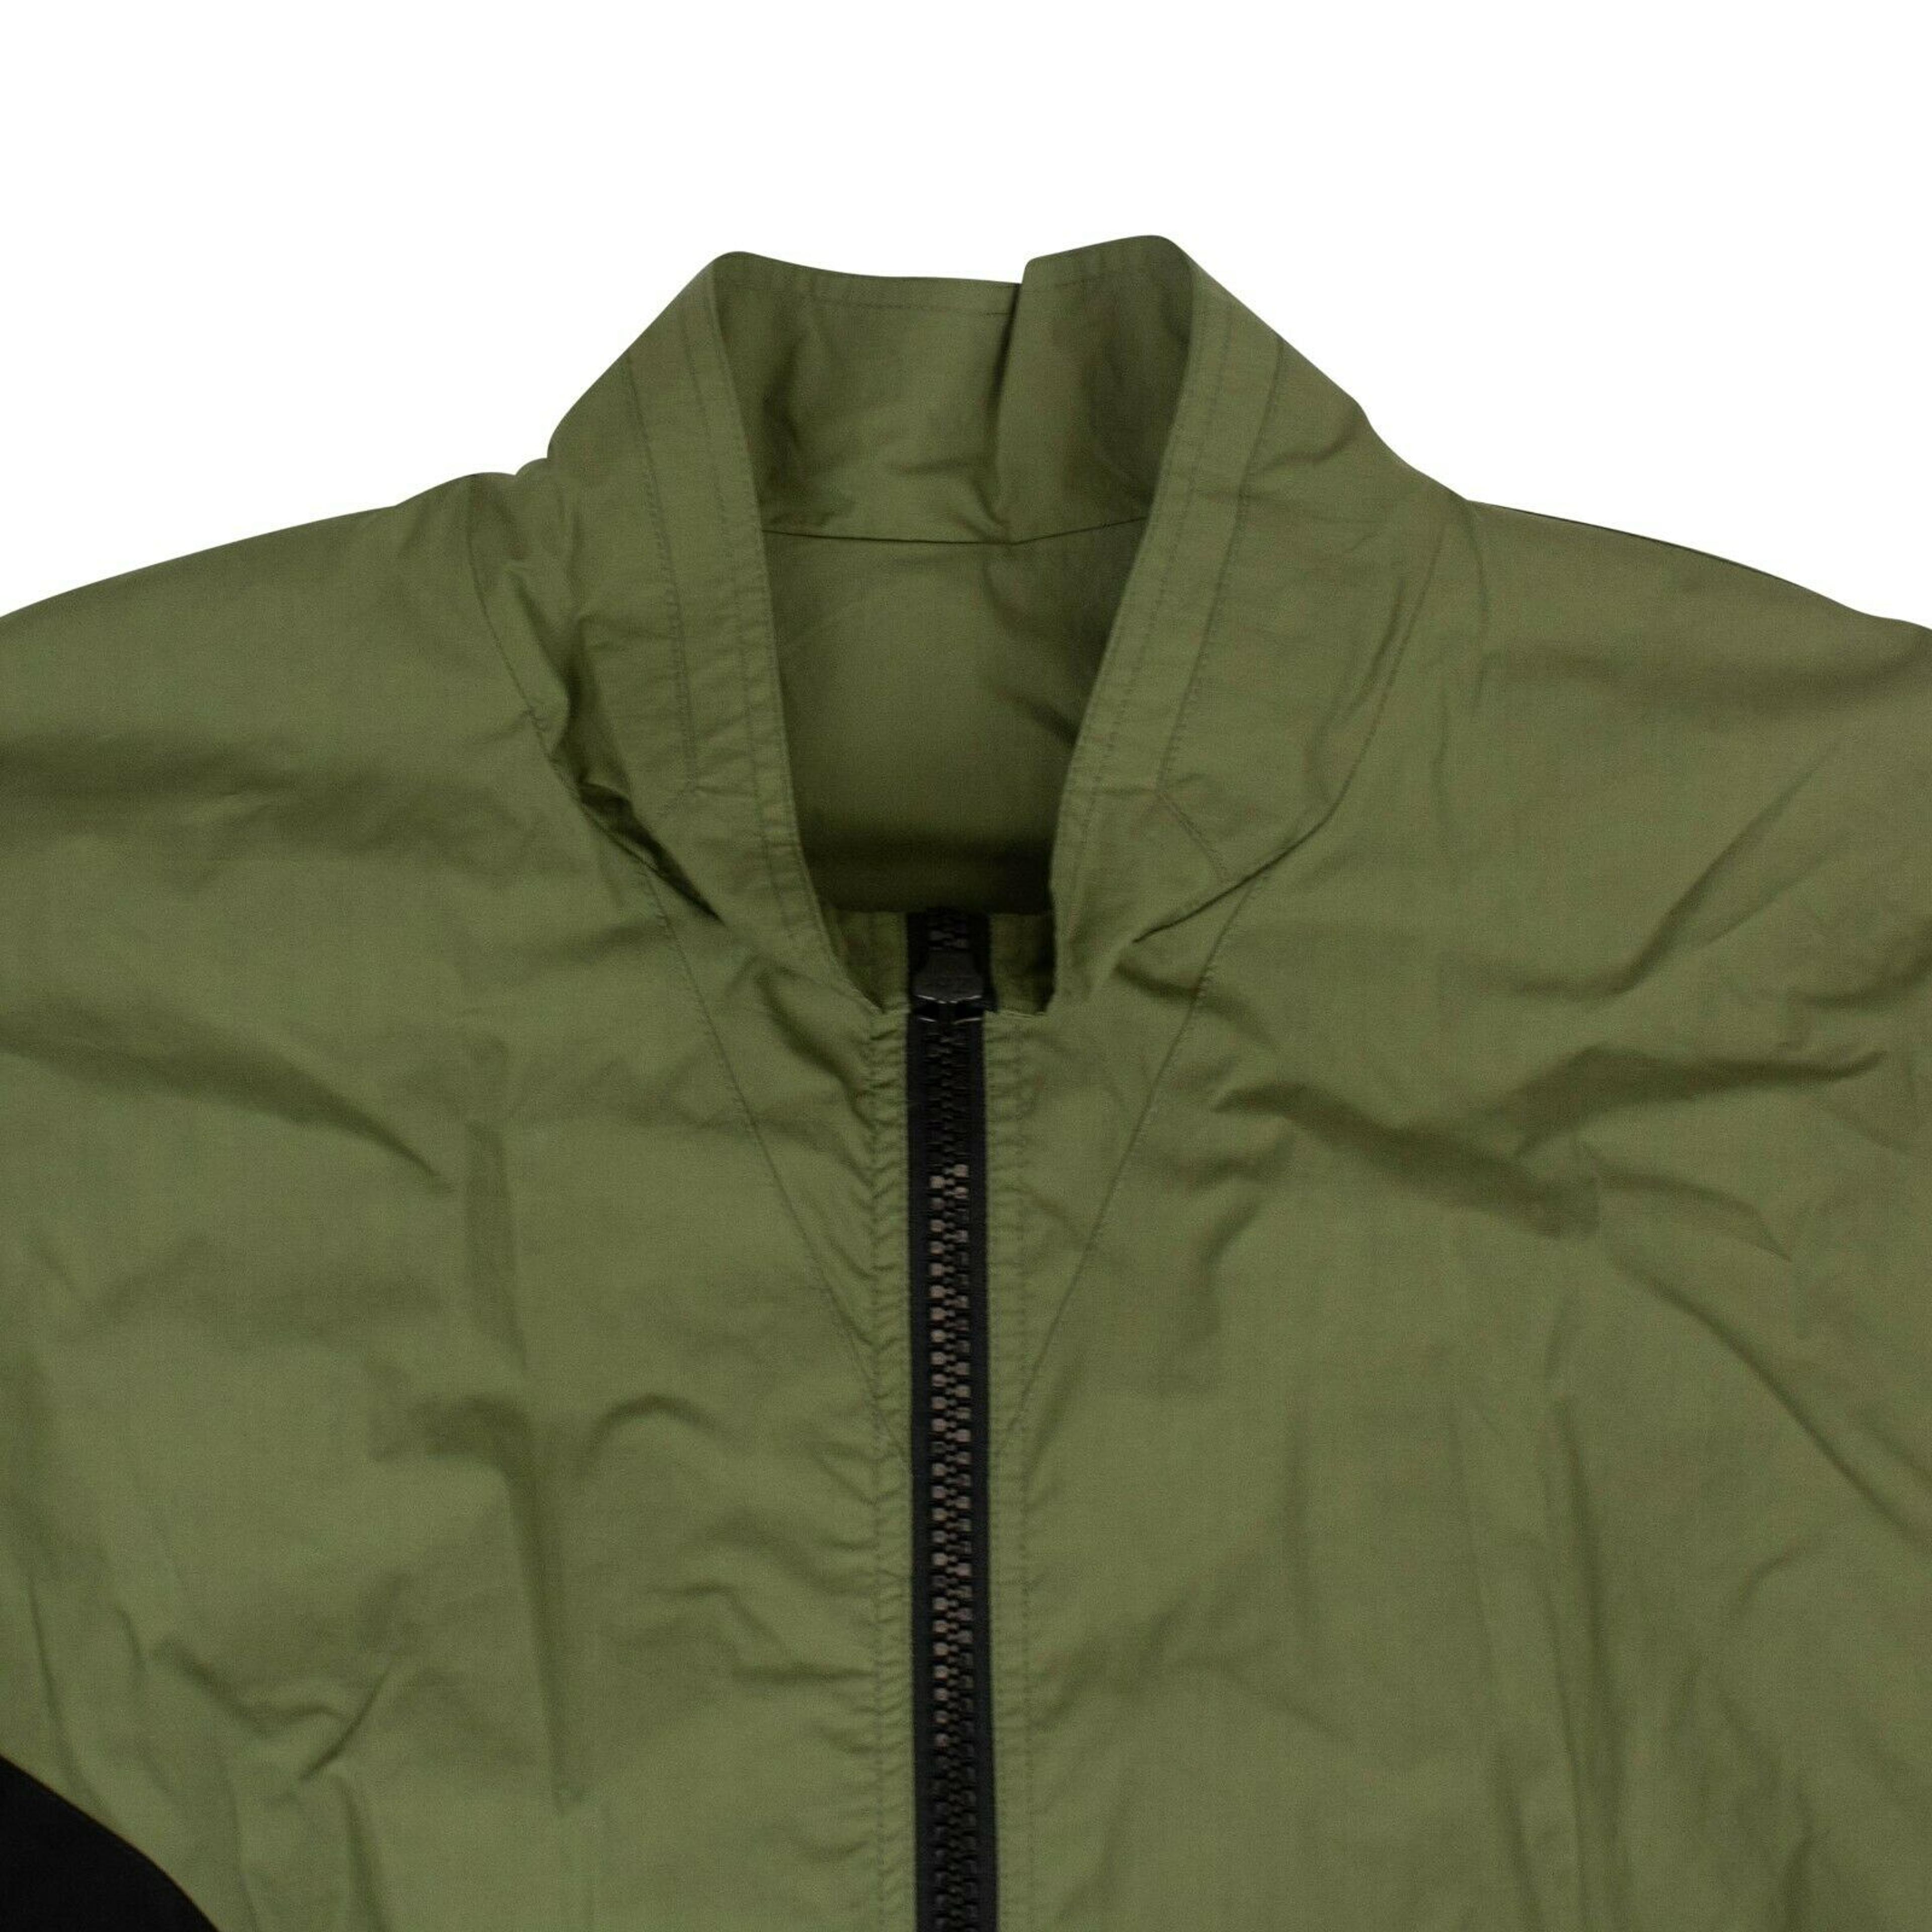 Alternate View 2 of Green And Black Panel Lightweight Jacket